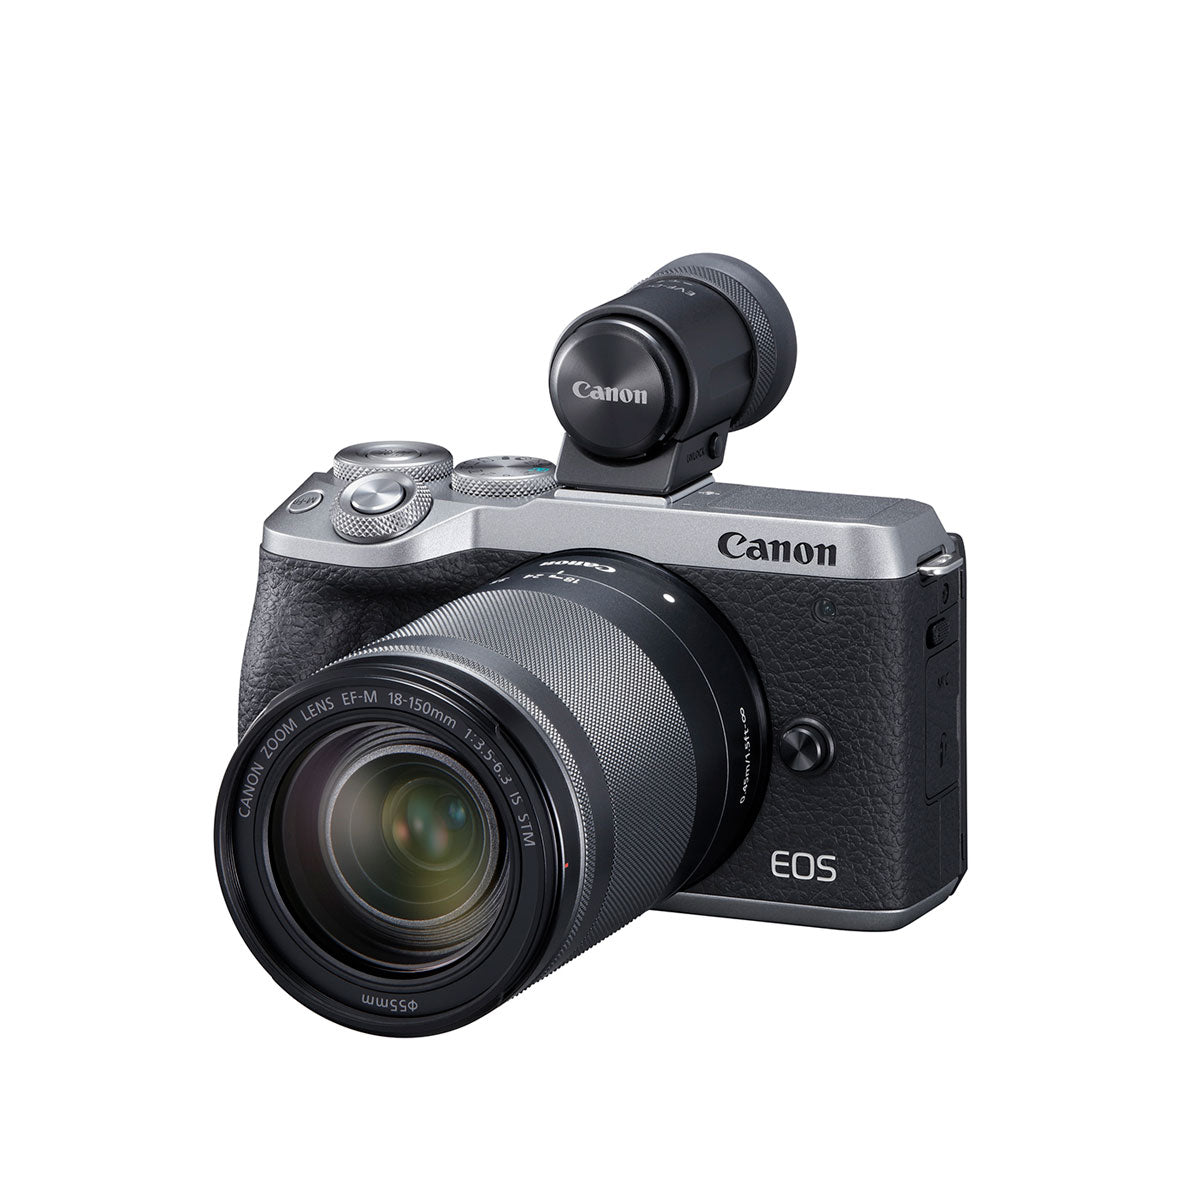 Canon EOS M6 Mark II Mirrorless Camera with EF-M 18-150mm IS STM Lens and EVF (Silver)